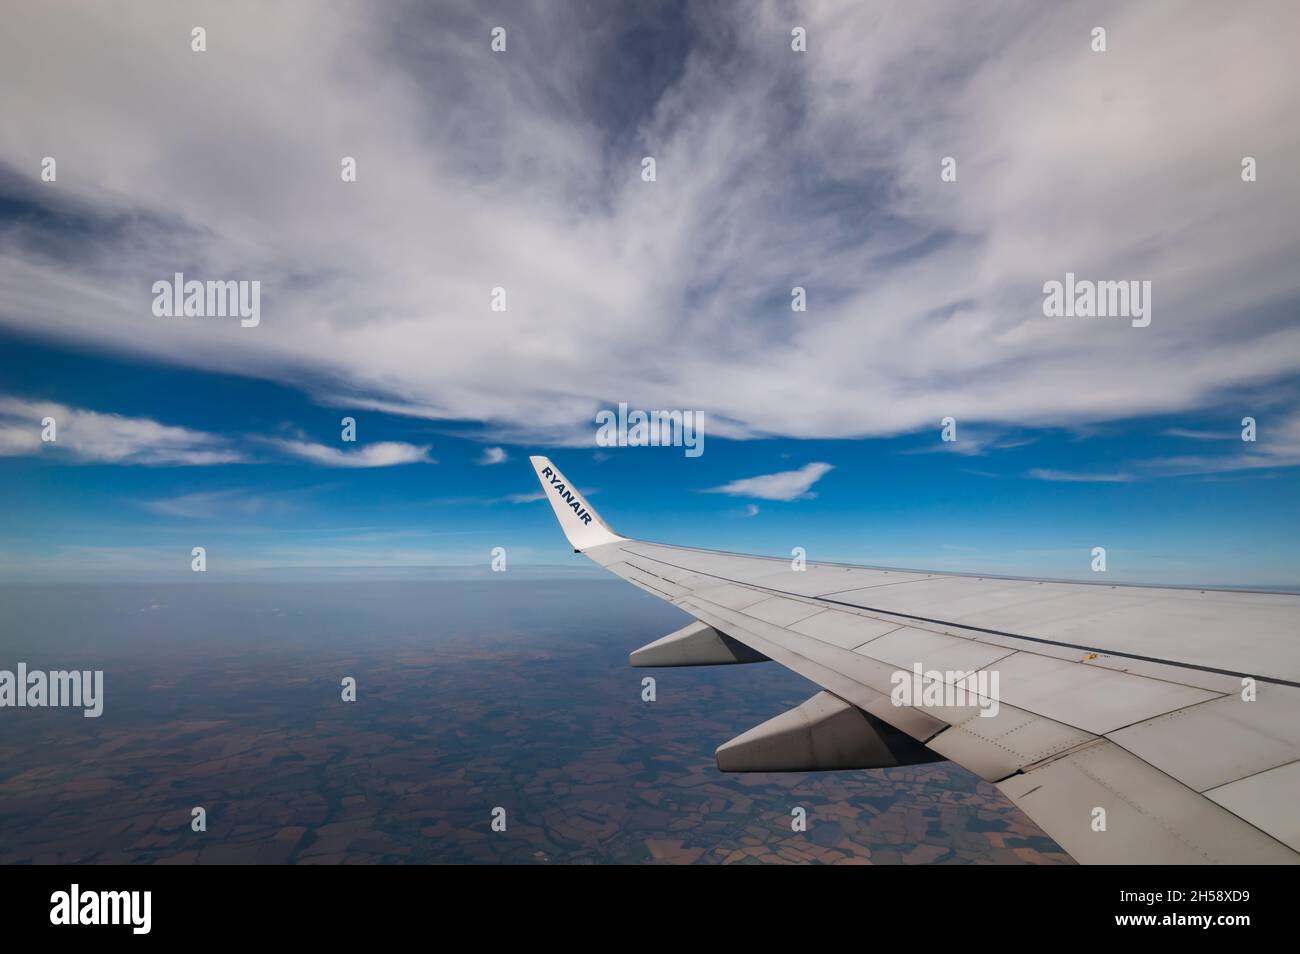 06/09/2021. Commercial Ryanair airborne airplane at high altitude. Cabin window view at wing with trademark name. Stock Photo